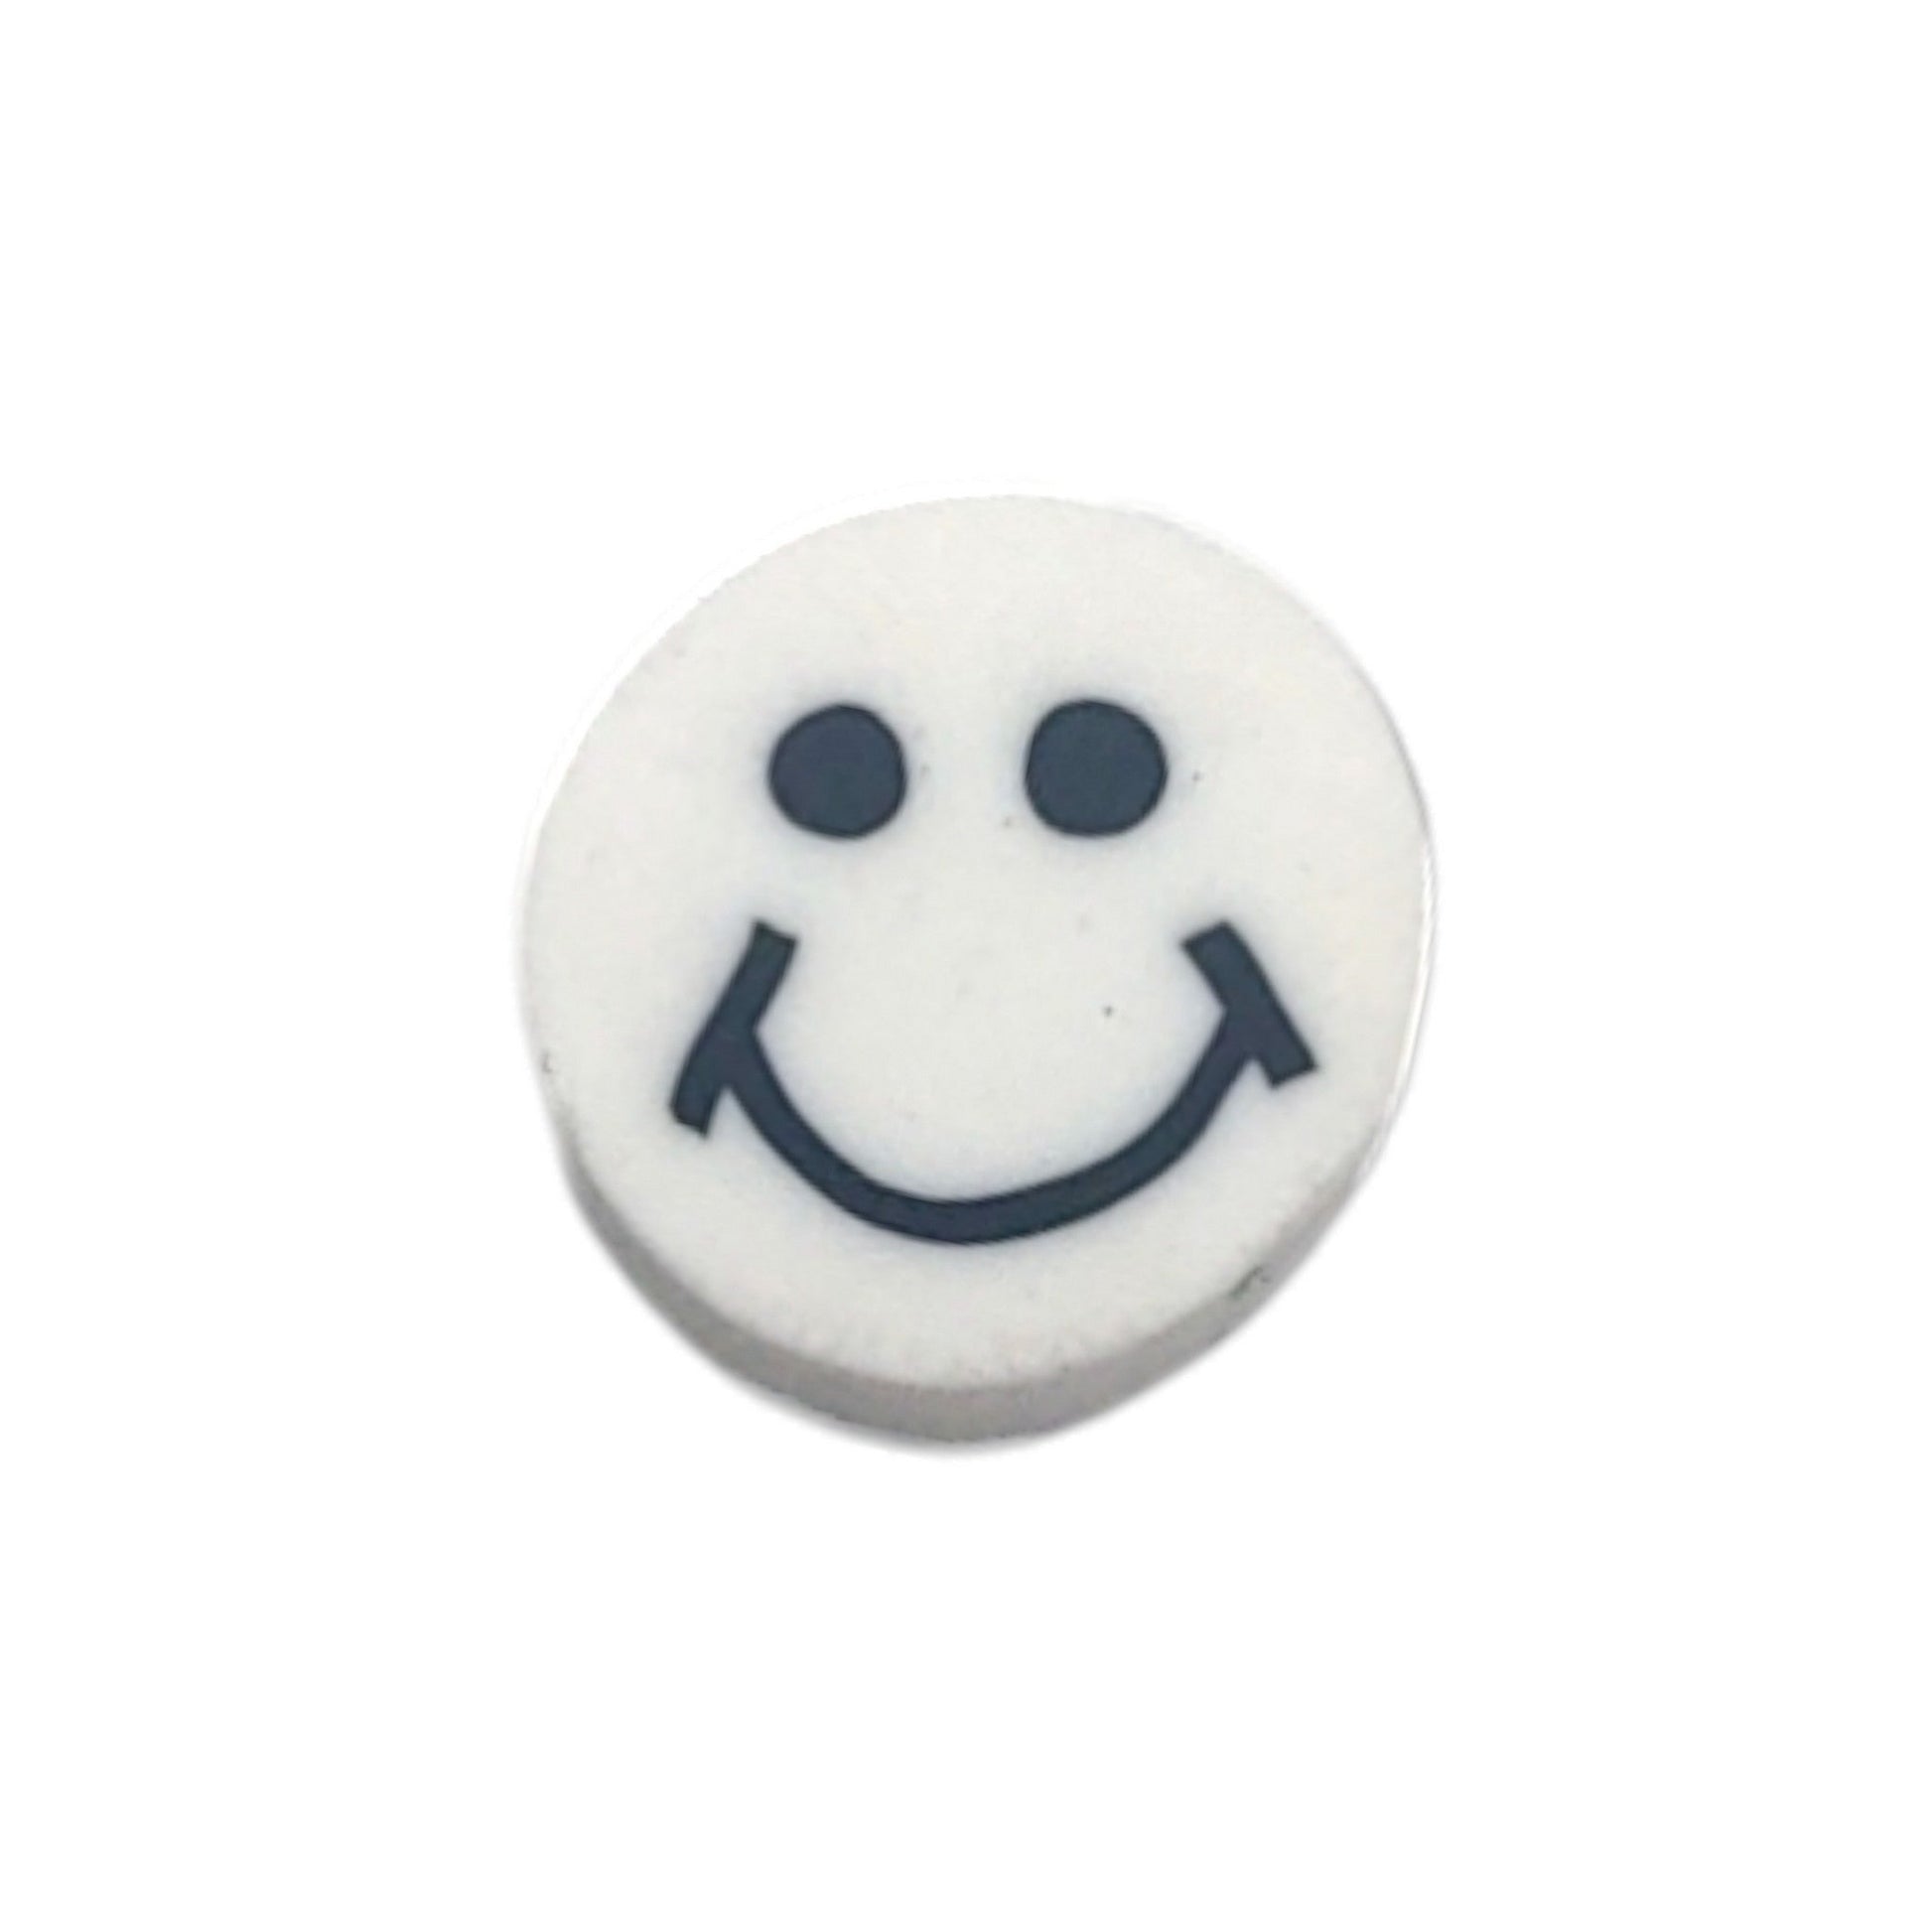 Indian Petals Smiley Face Shape Soft Resin Motif For Crafting or Decor - 13534